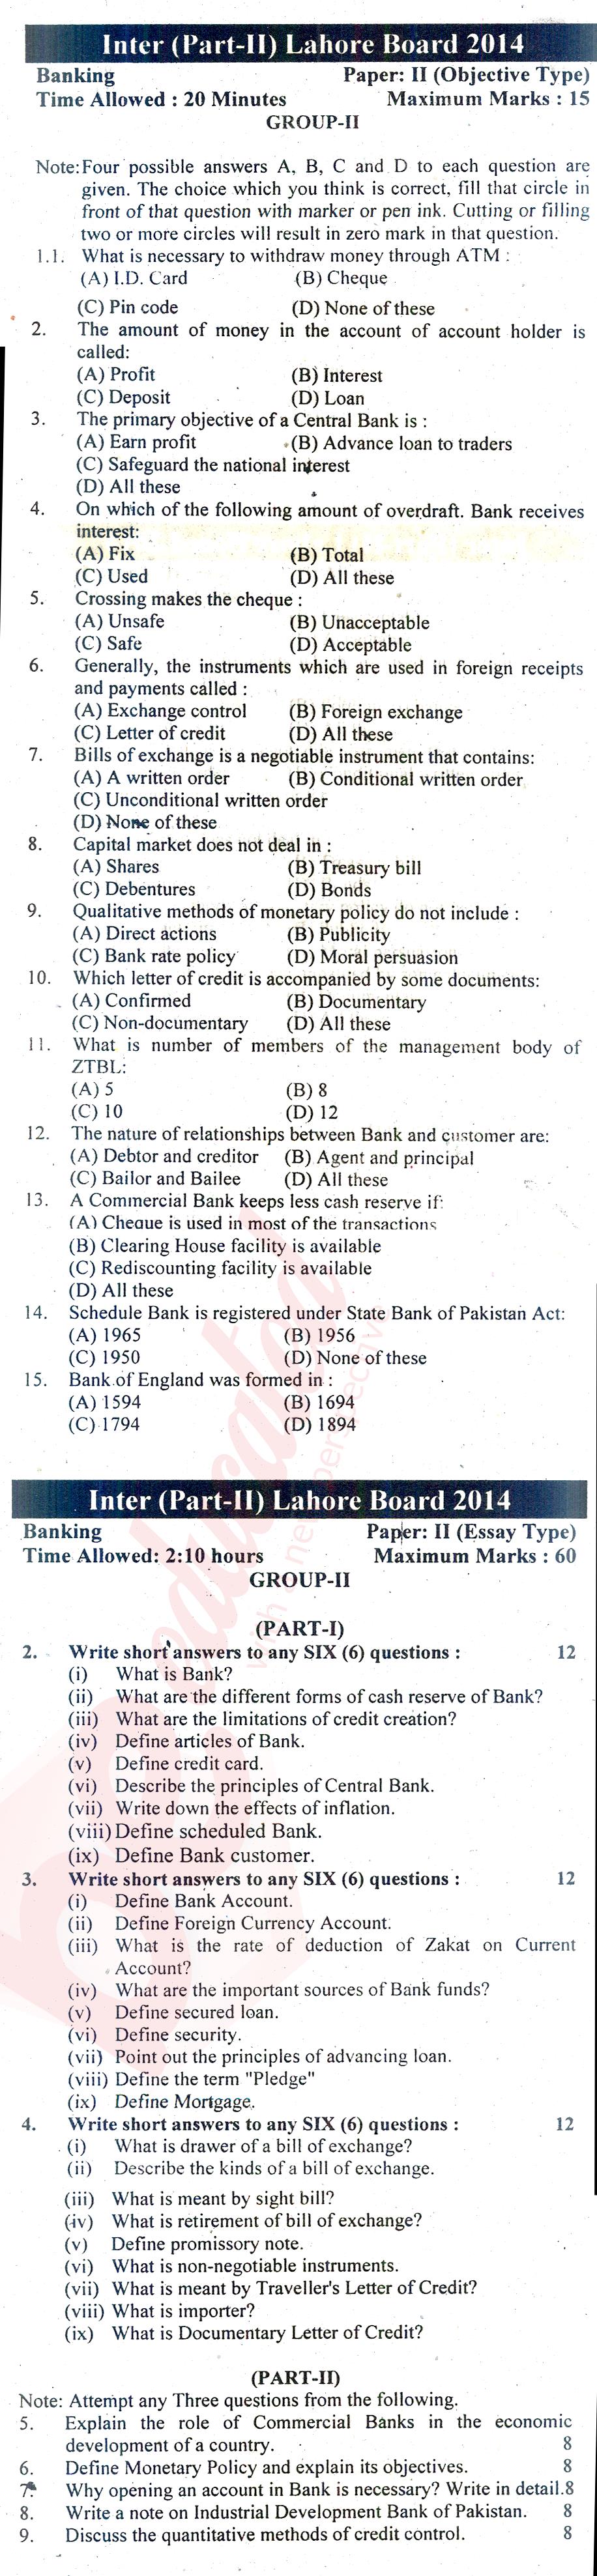 Principles of Banking ICOM Part 2 Past Paper Group 2 BISE Lahore 2014